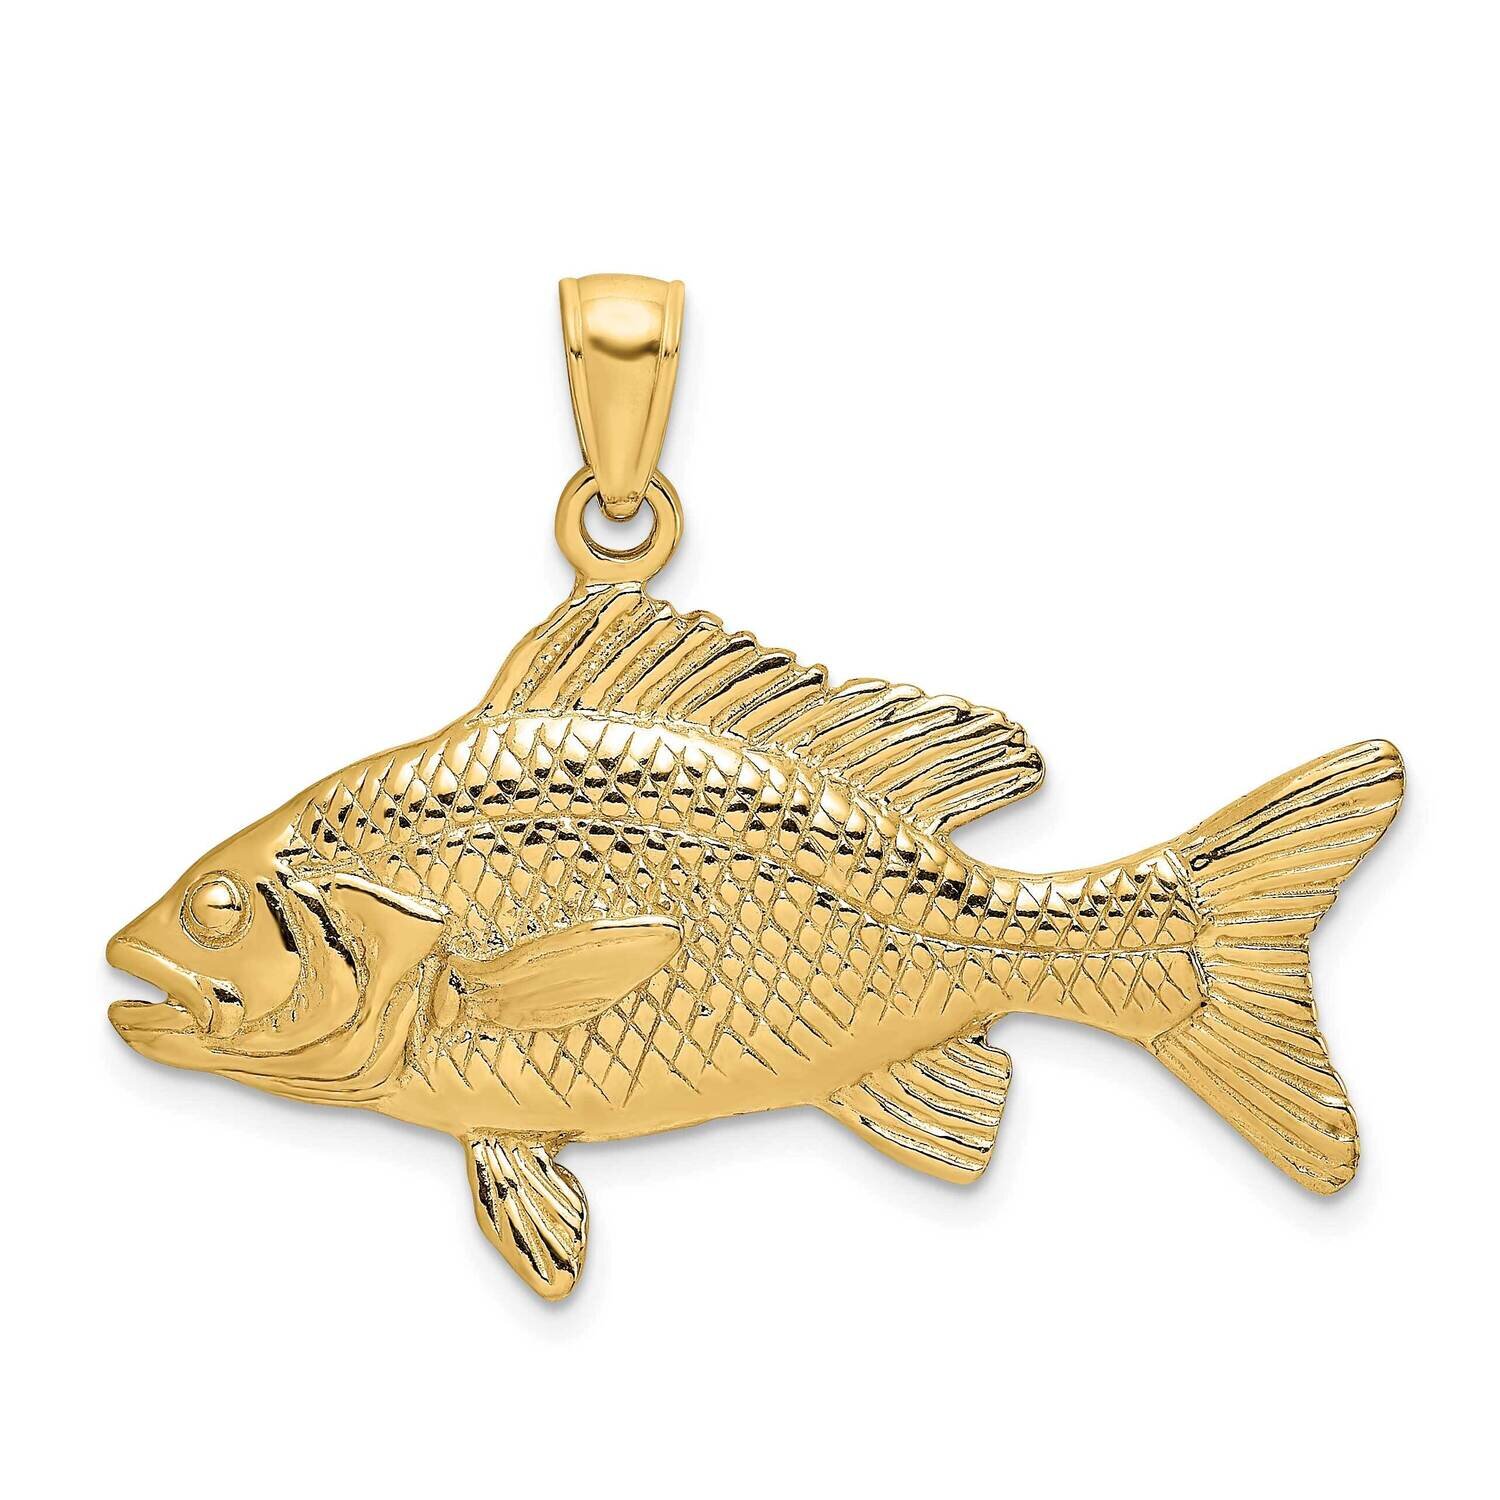 Red Snapper Fish Charm 14k Gold 3-D Textured K8117